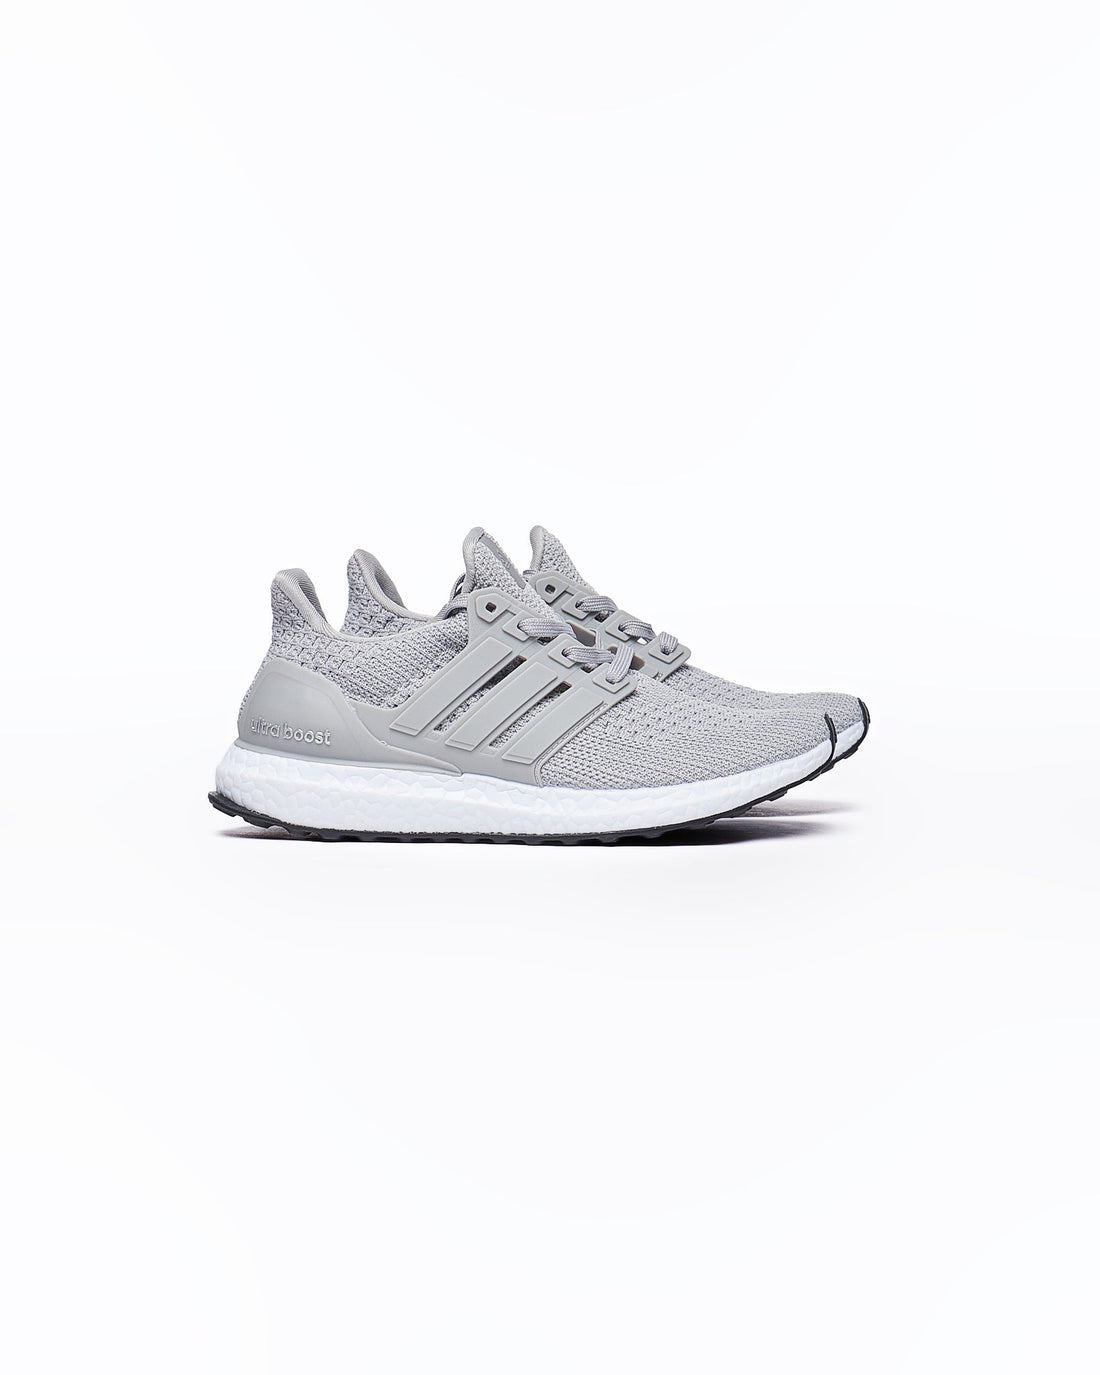 MOI OUTFIT-ADI Ultra Boost Grey Runners Shoes 39.90